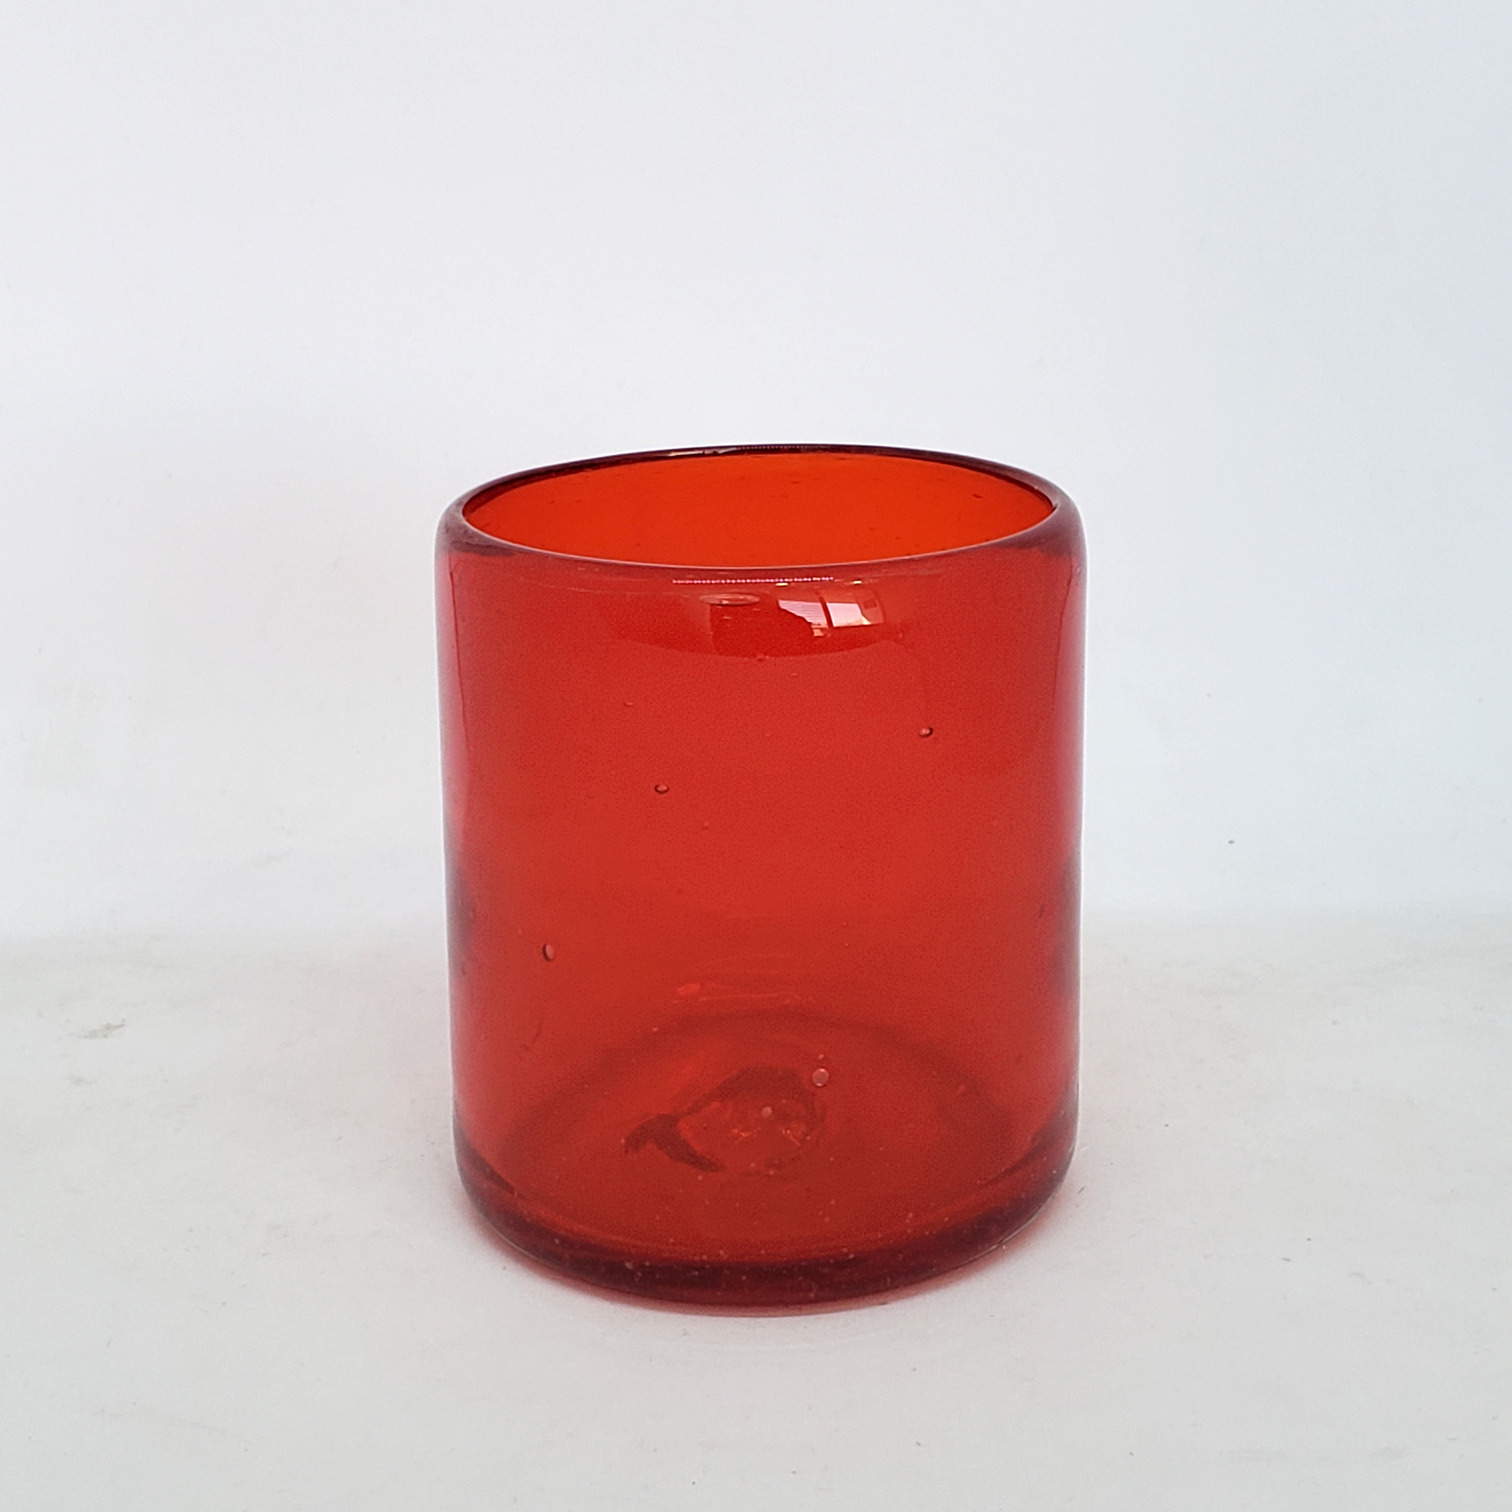 Colored Glassware / Solid Ruby Red 9 oz Short Tumblers (set of 6) / Enhance your favorite drink with these colorful handcrafted glasses.